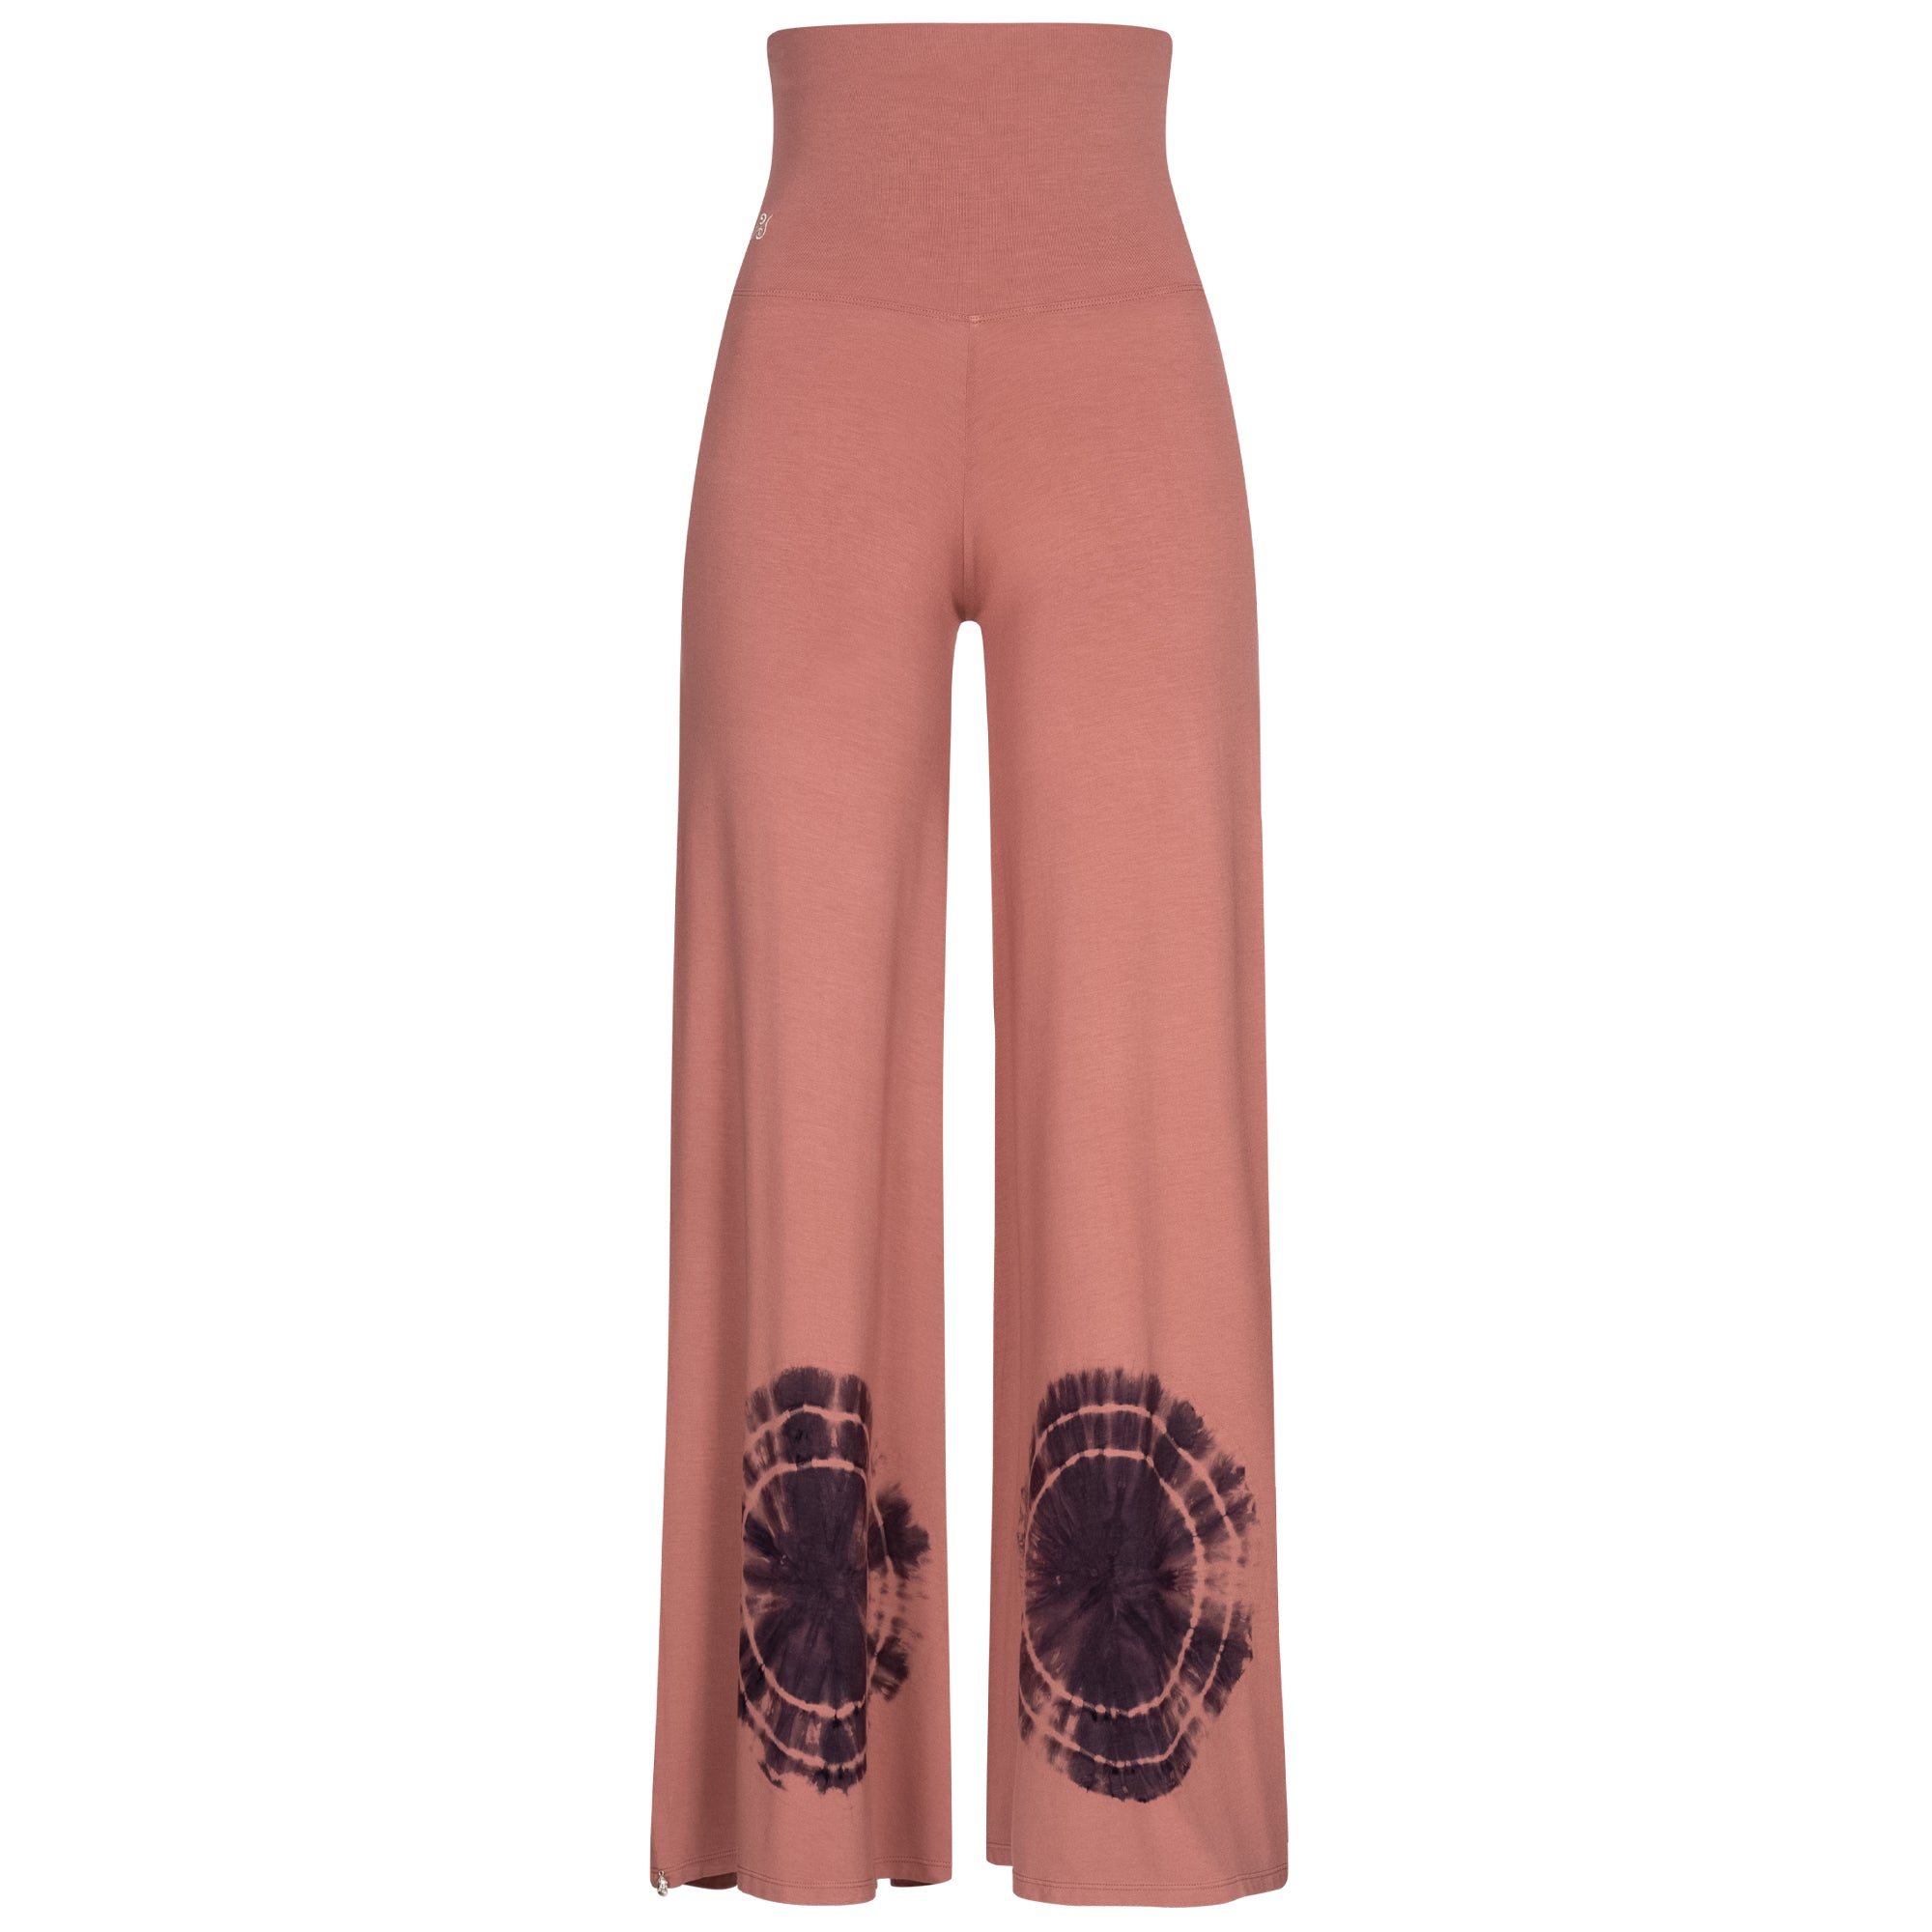 Hipster Pants Rosé (LIMITED EDITION)